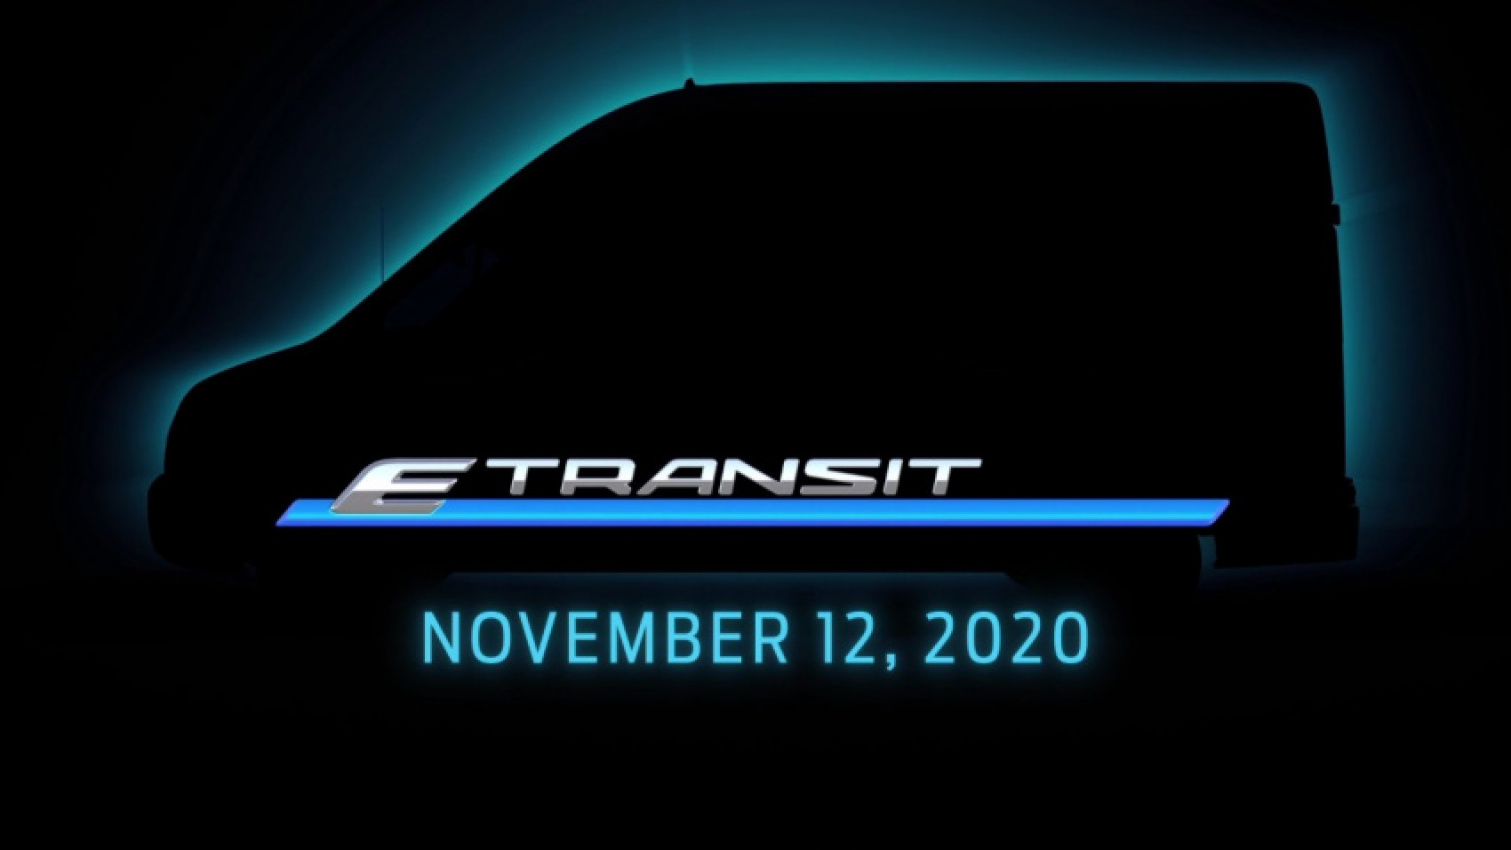 autos, cars, commercial vehicles, ford, e-transit, ford motor company, mark kaufman, ford to unveil zero-emission, all-electric e-transit van on november 12th